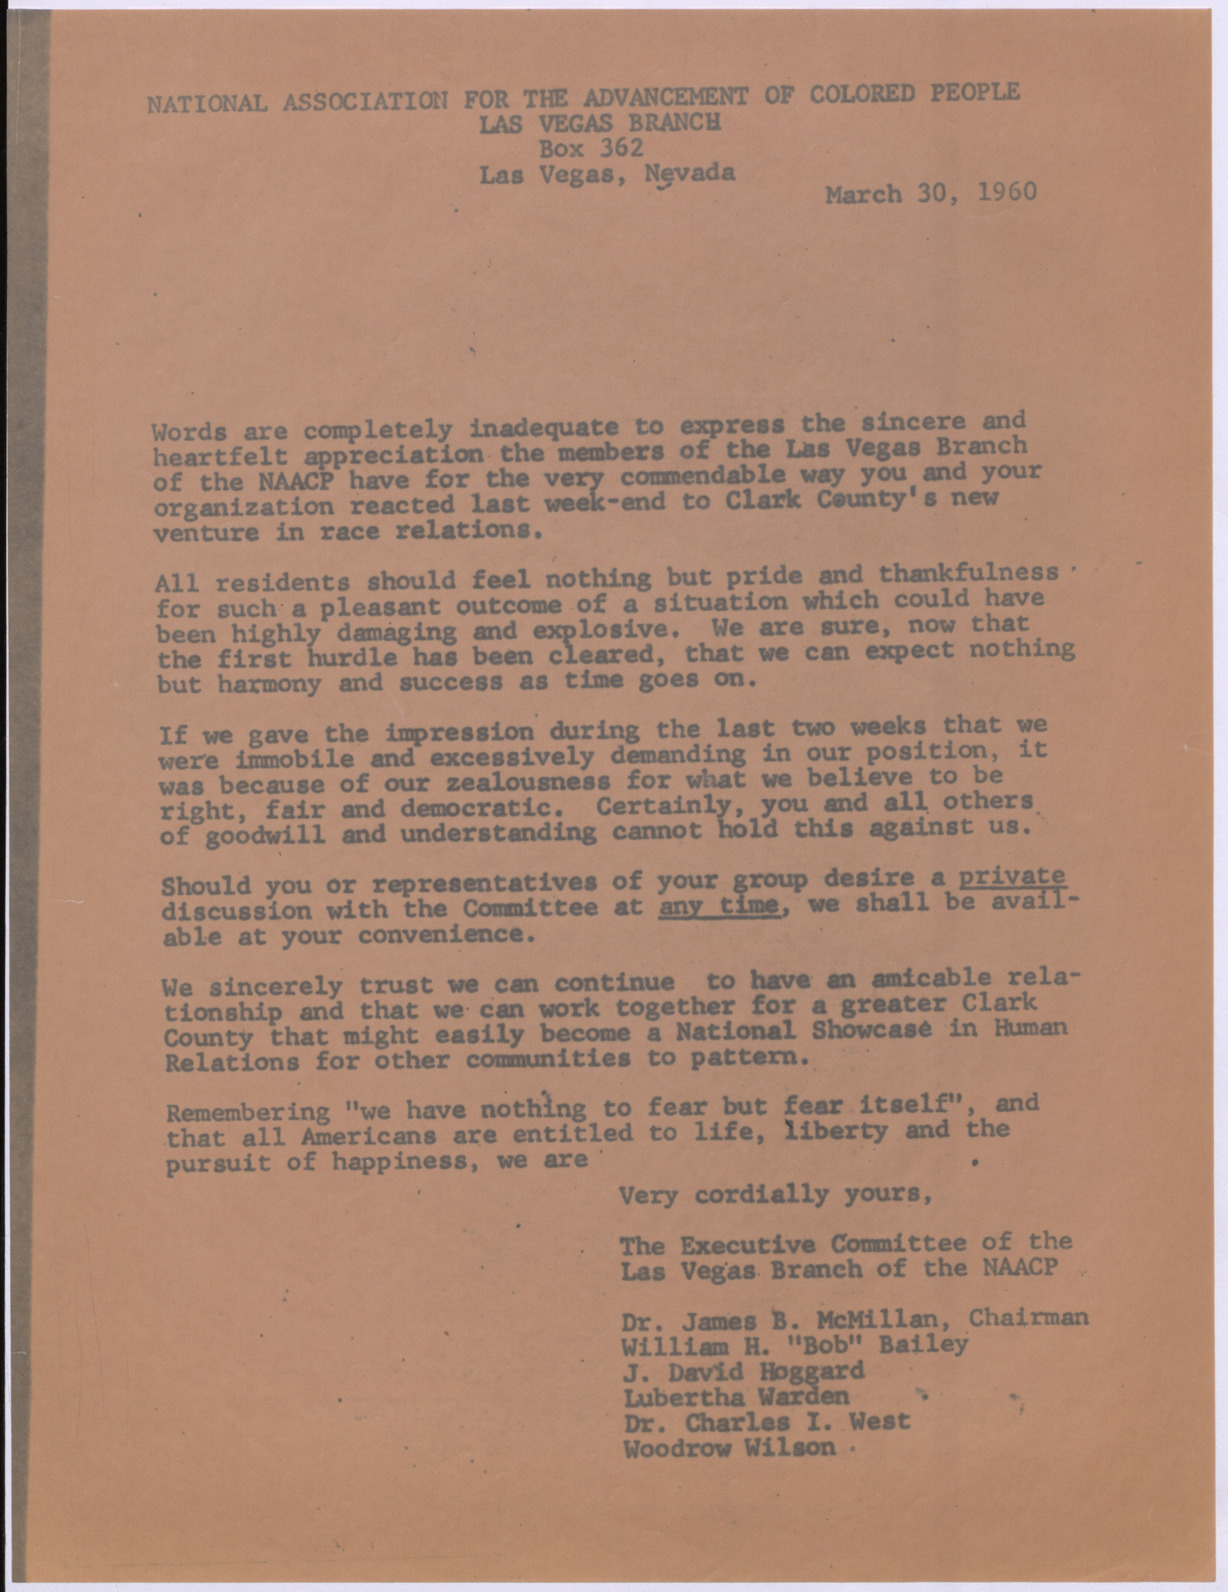 Letter from the Executive Committee of the Las Vegas Branch of the NAACP to an unknown party, March 30, 1960